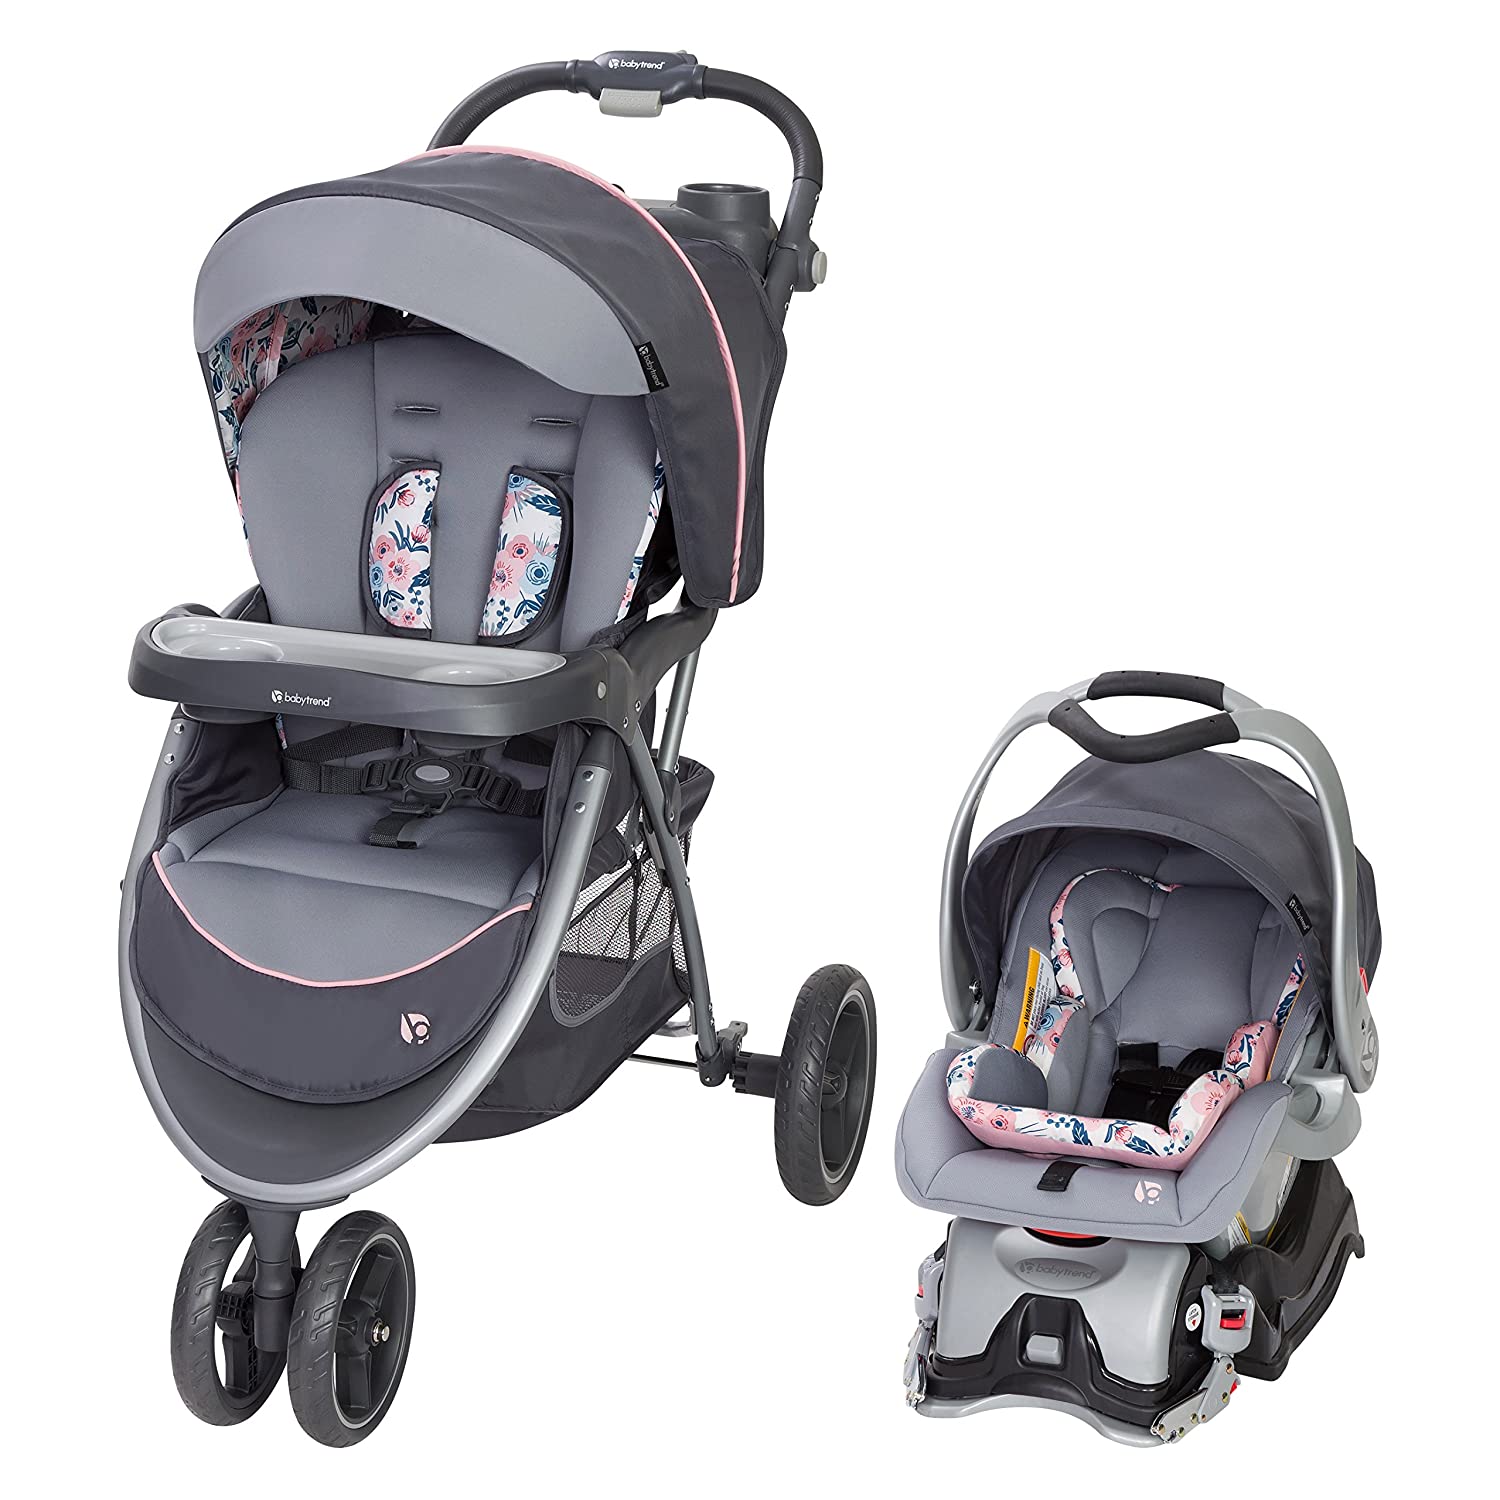 Baby Trend Sky View Plus Folding Infant Carseat Stroller